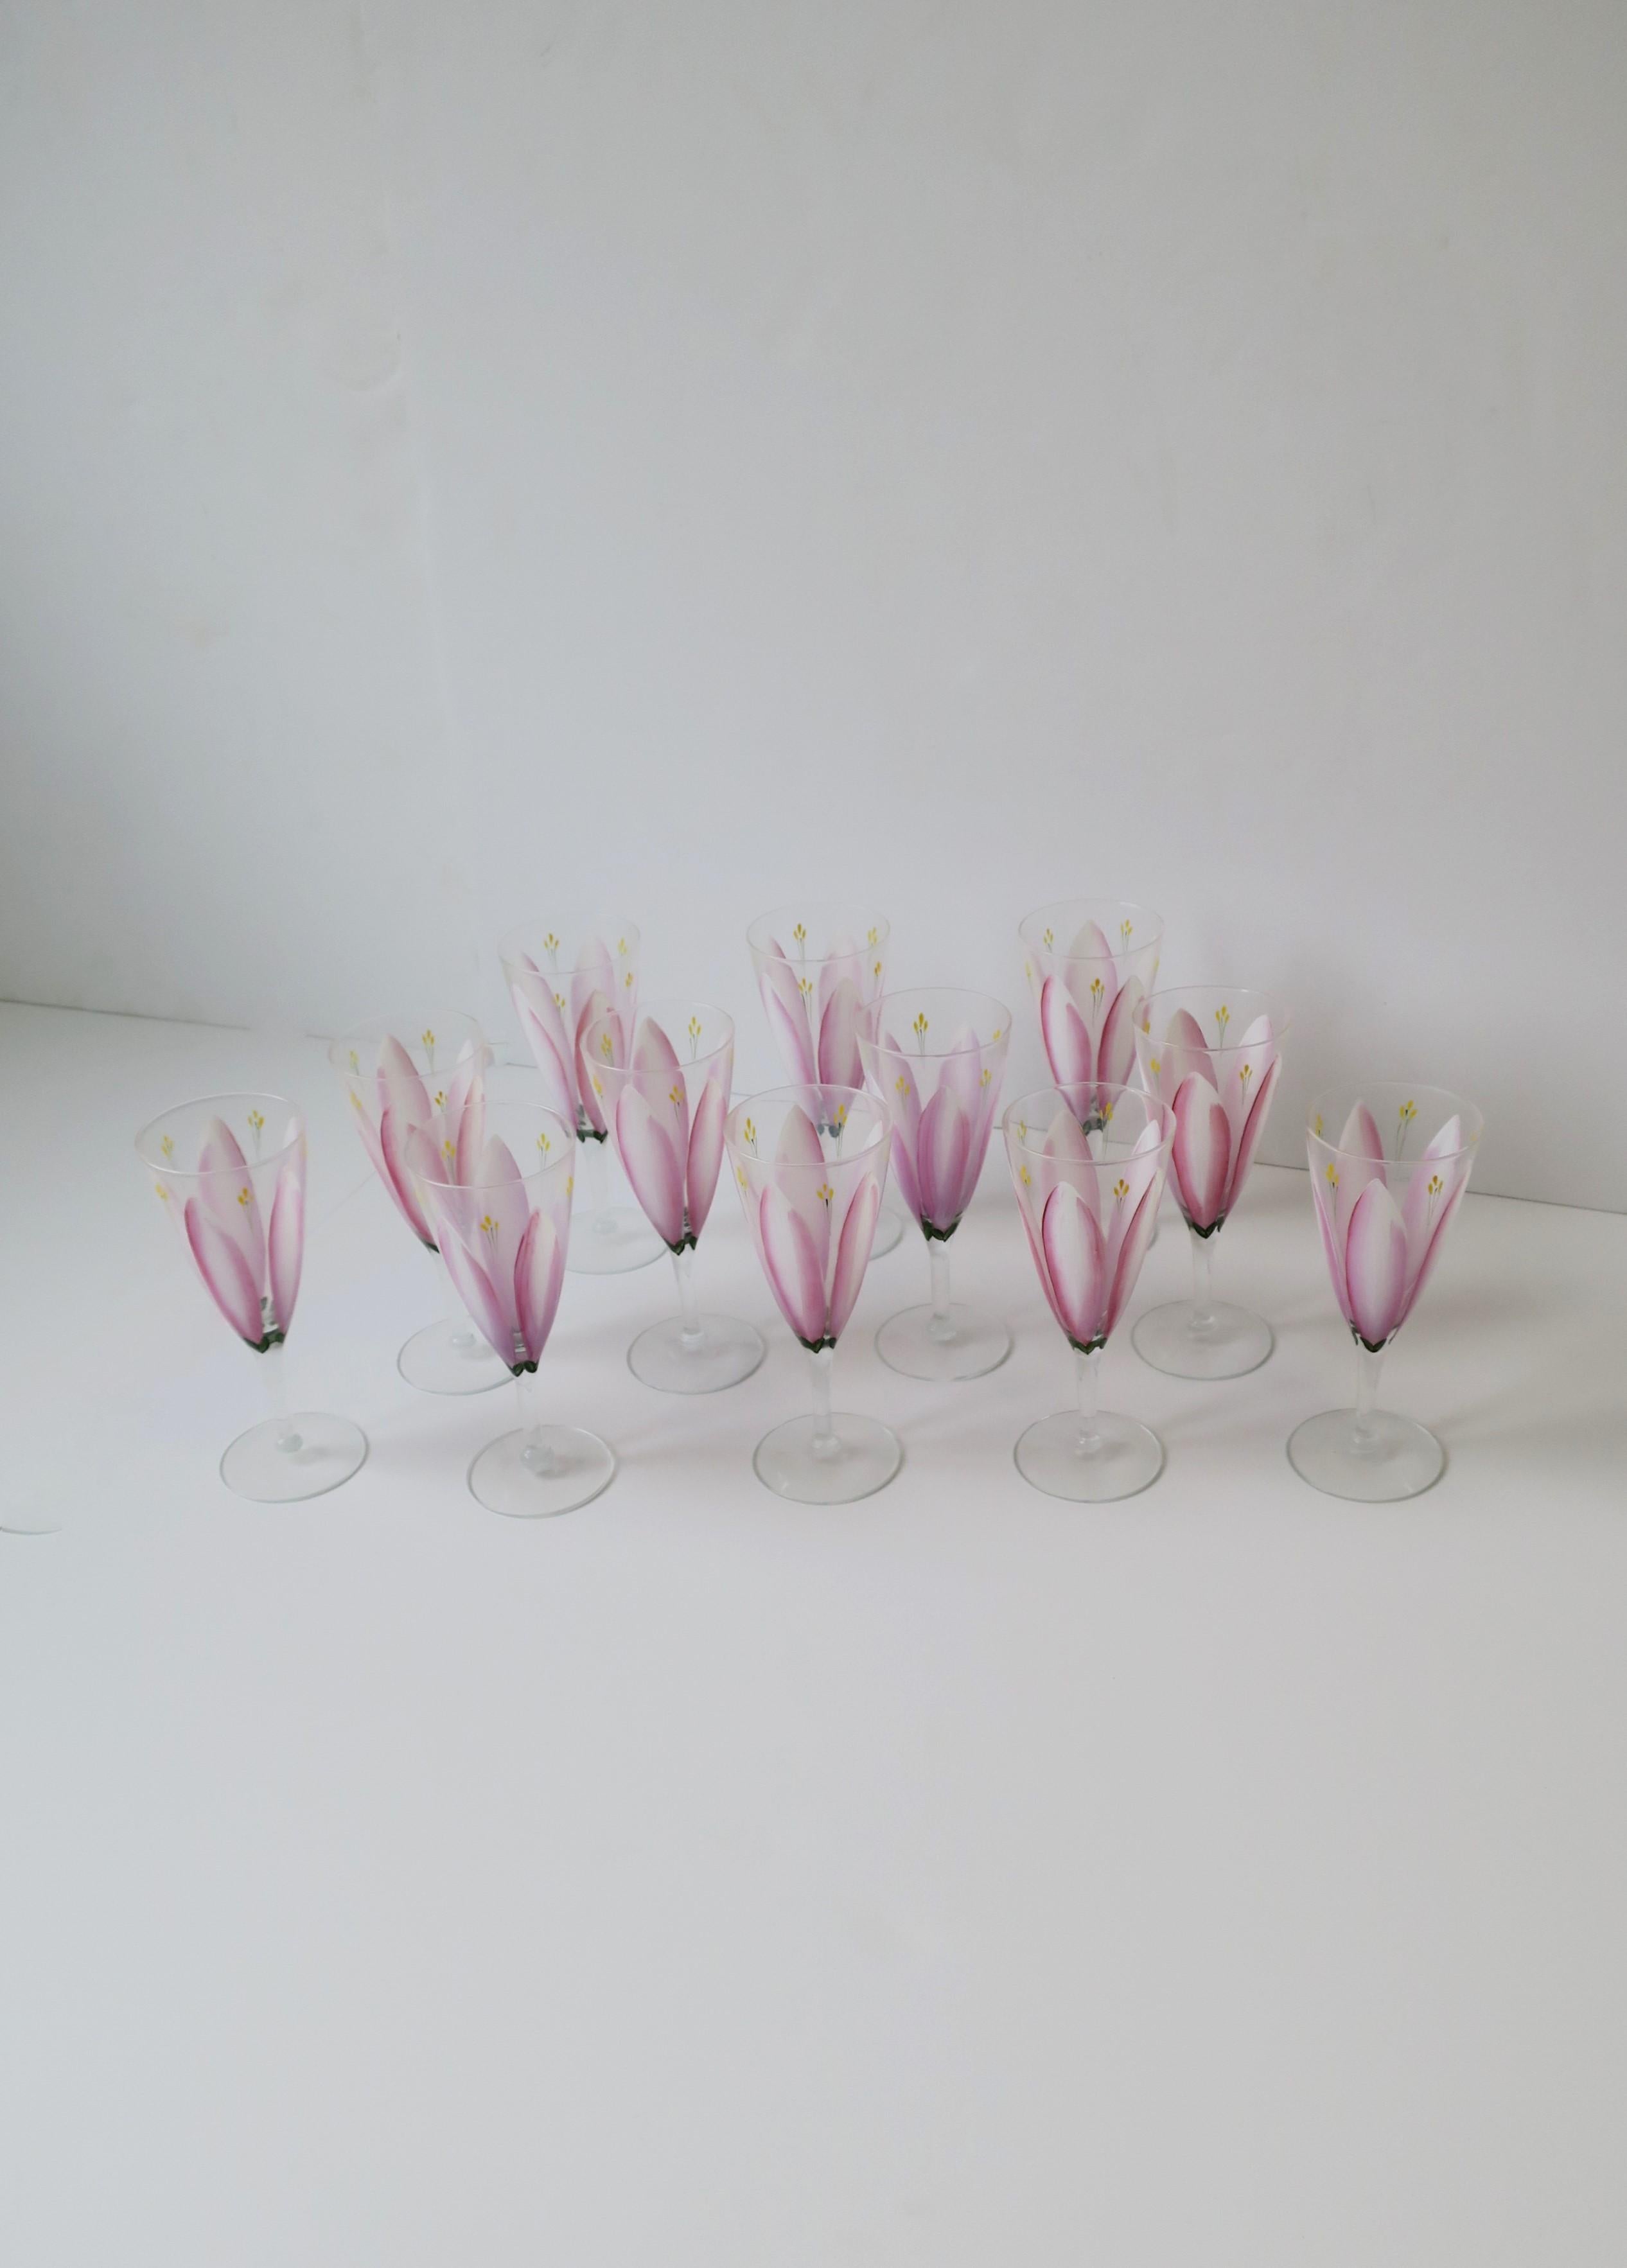 Hand-Painted Champagne Flutes Glasses with Pink Tulip Flower Design, Set of 12 For Sale